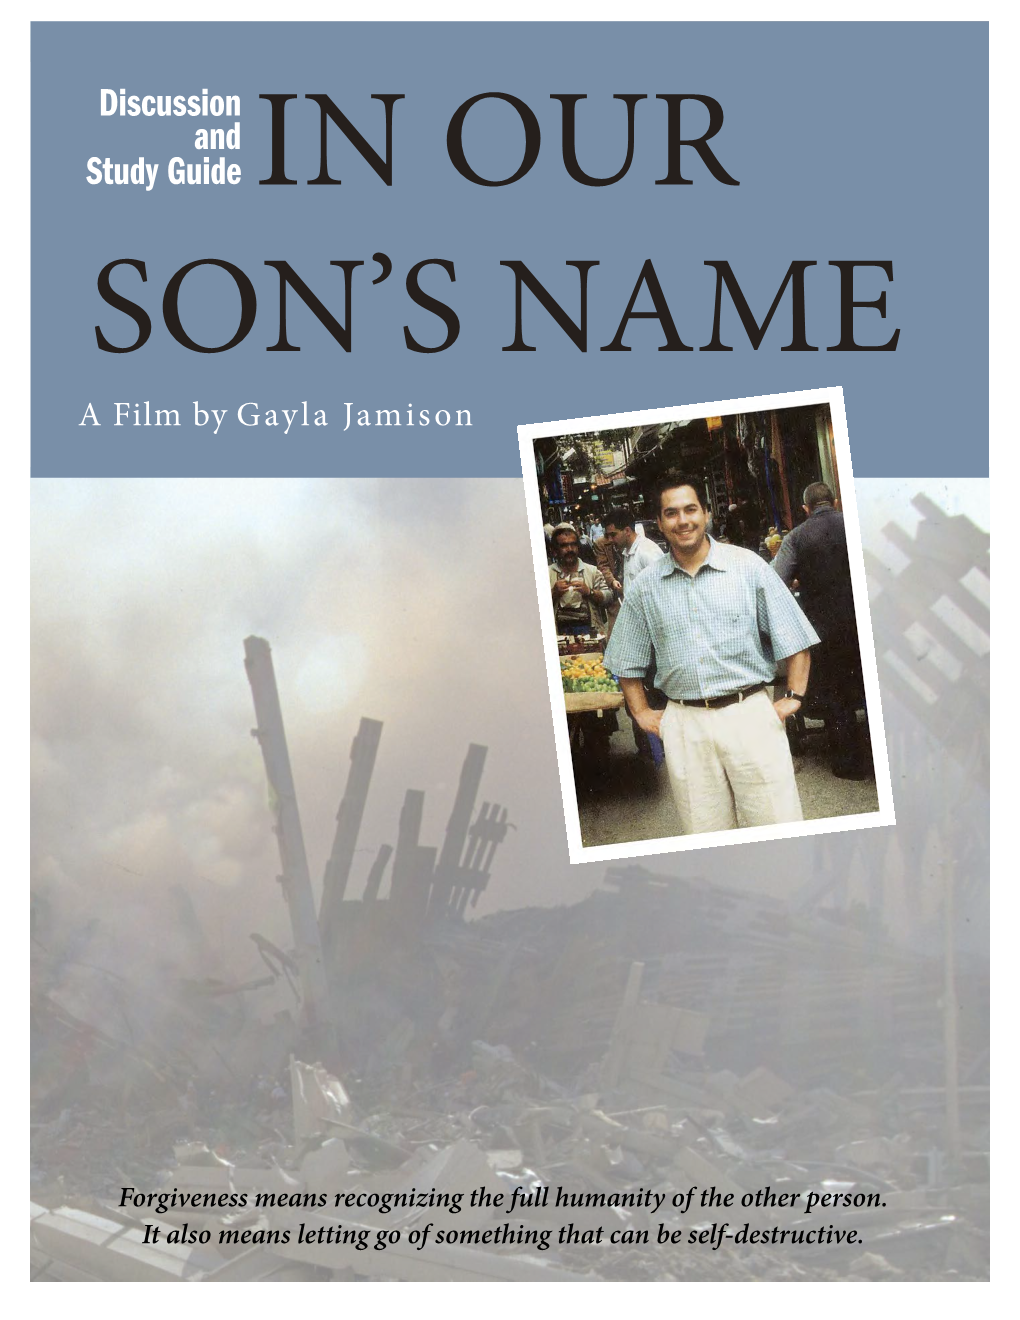 Discussion and Study Guide in OUR SON’S NAME a Film by Gayla Jamison